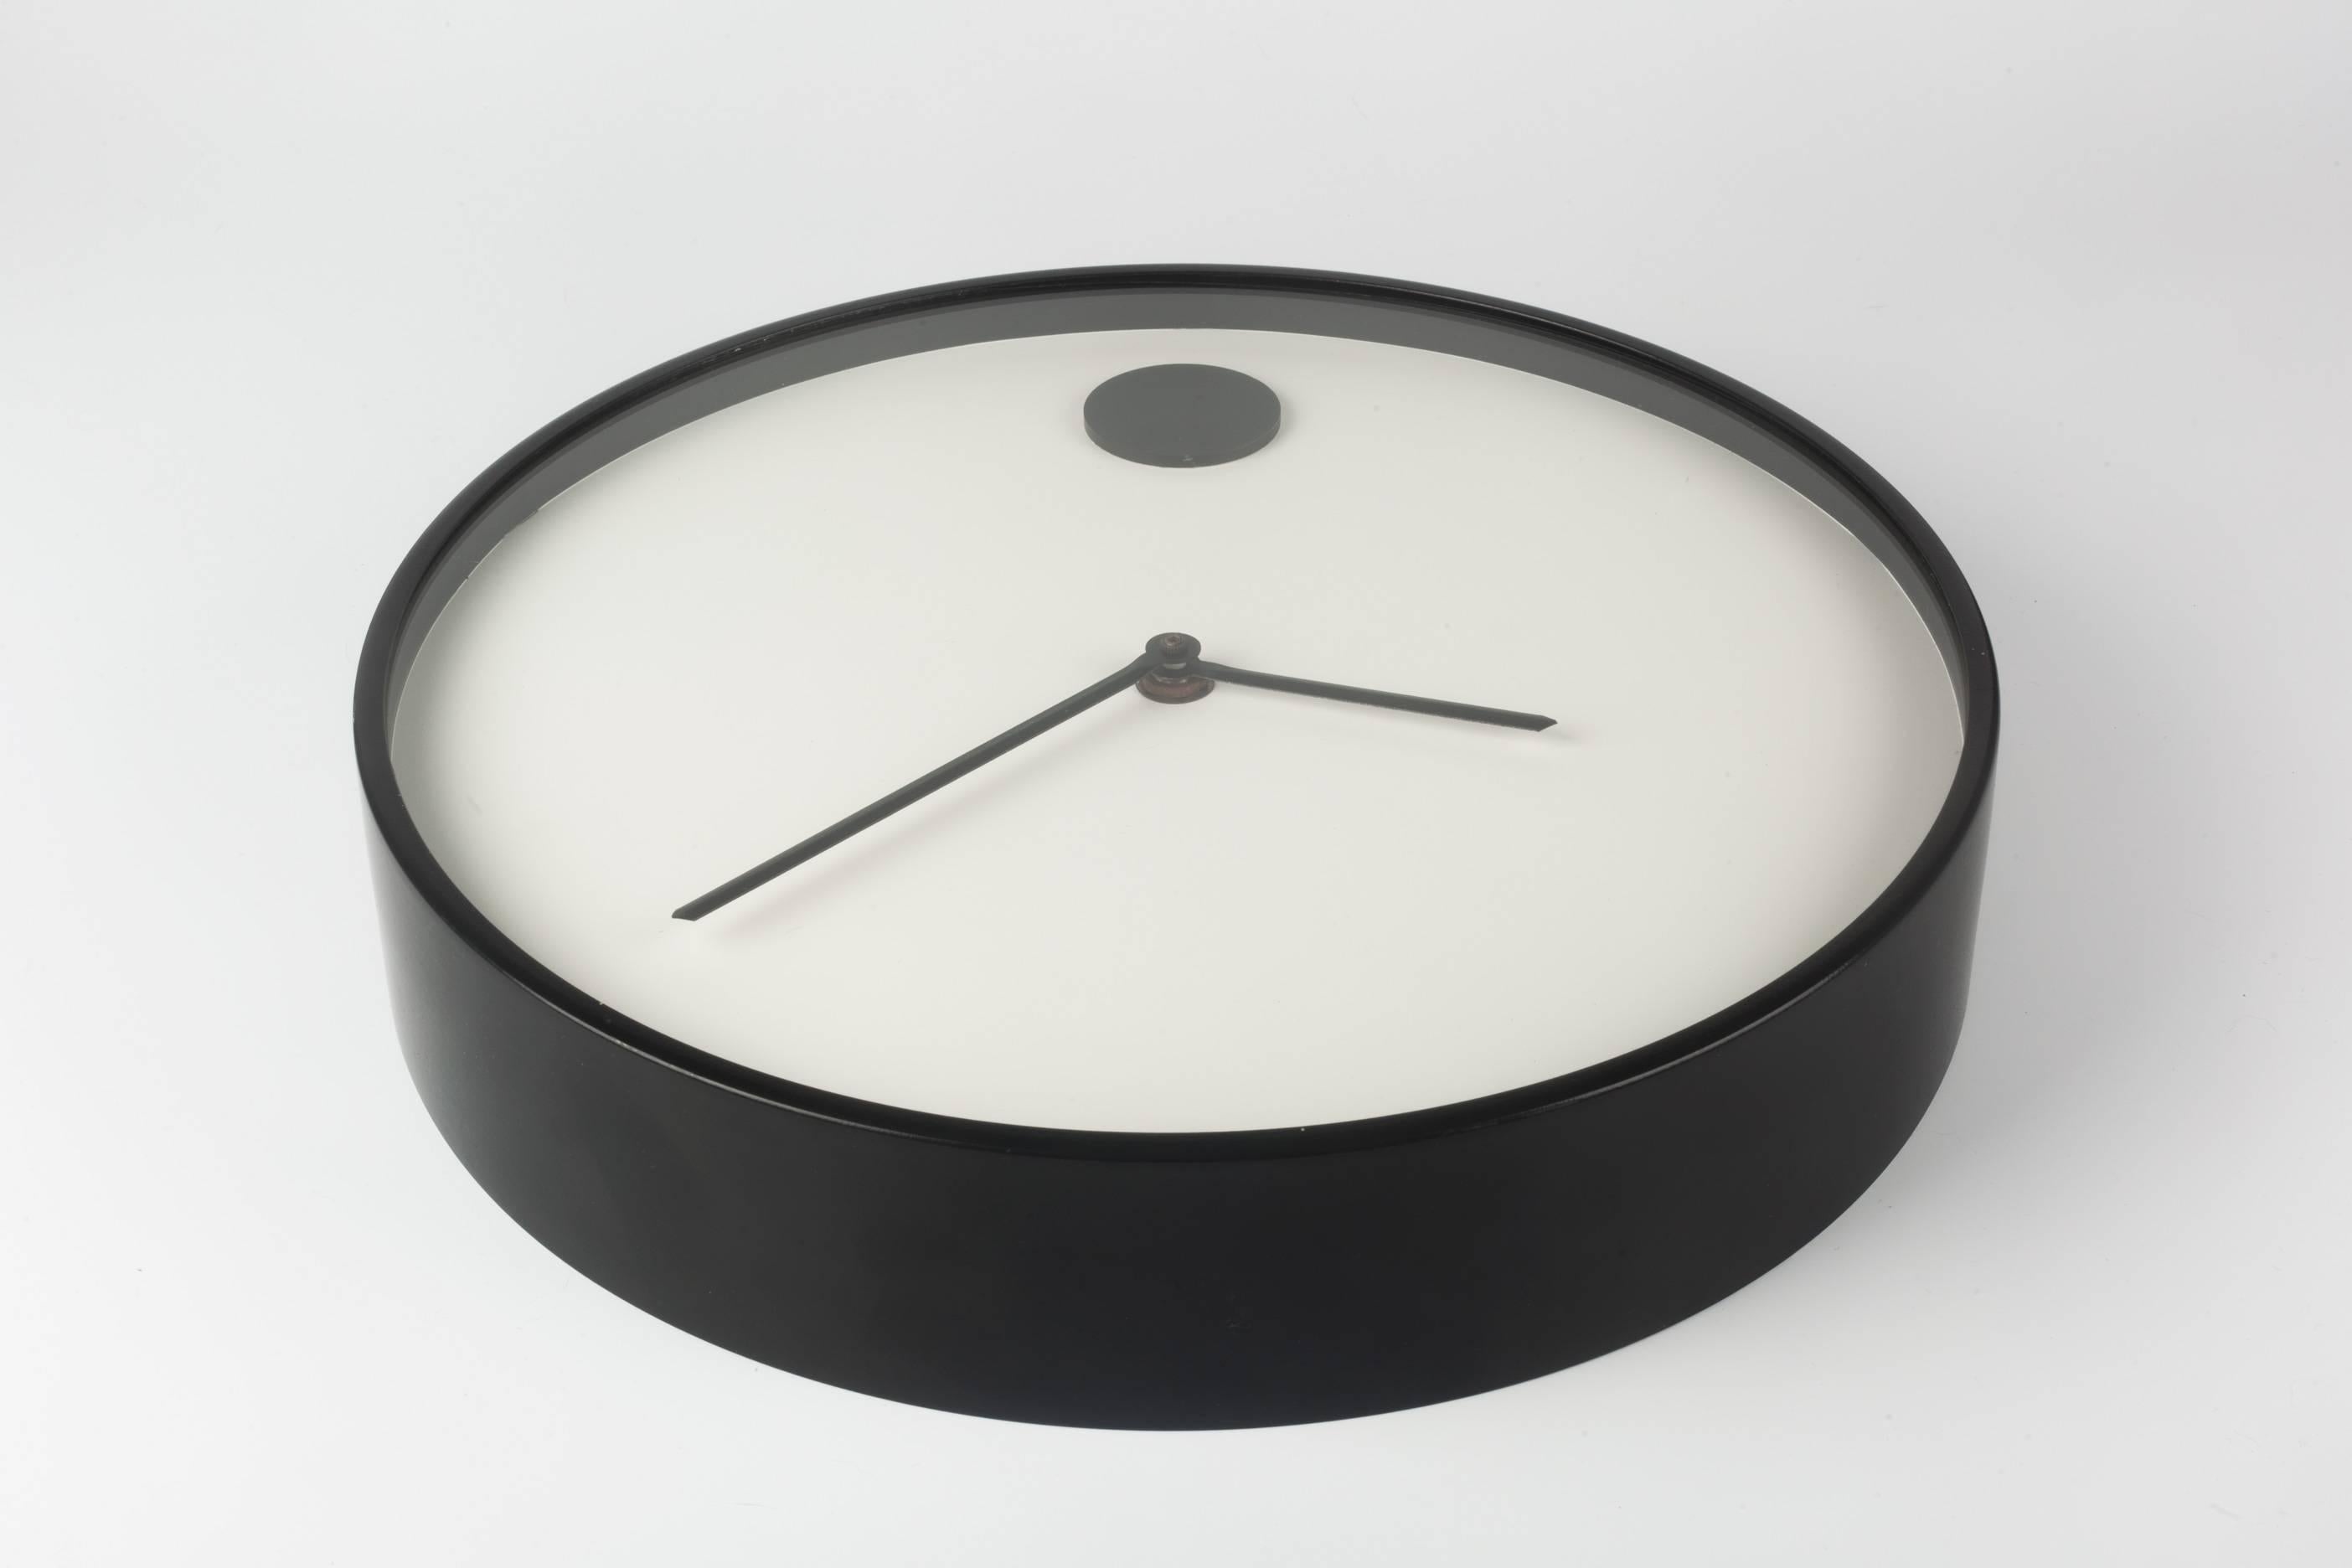 White wall clock with black metal frame, part of the MoMA design collection, 1970. Designed by Nathan George Horwitt for Howard Miller. Metal lacquered case and glass front. A wall clock version of Horwitt's previous watch design for Movado.

Nathan